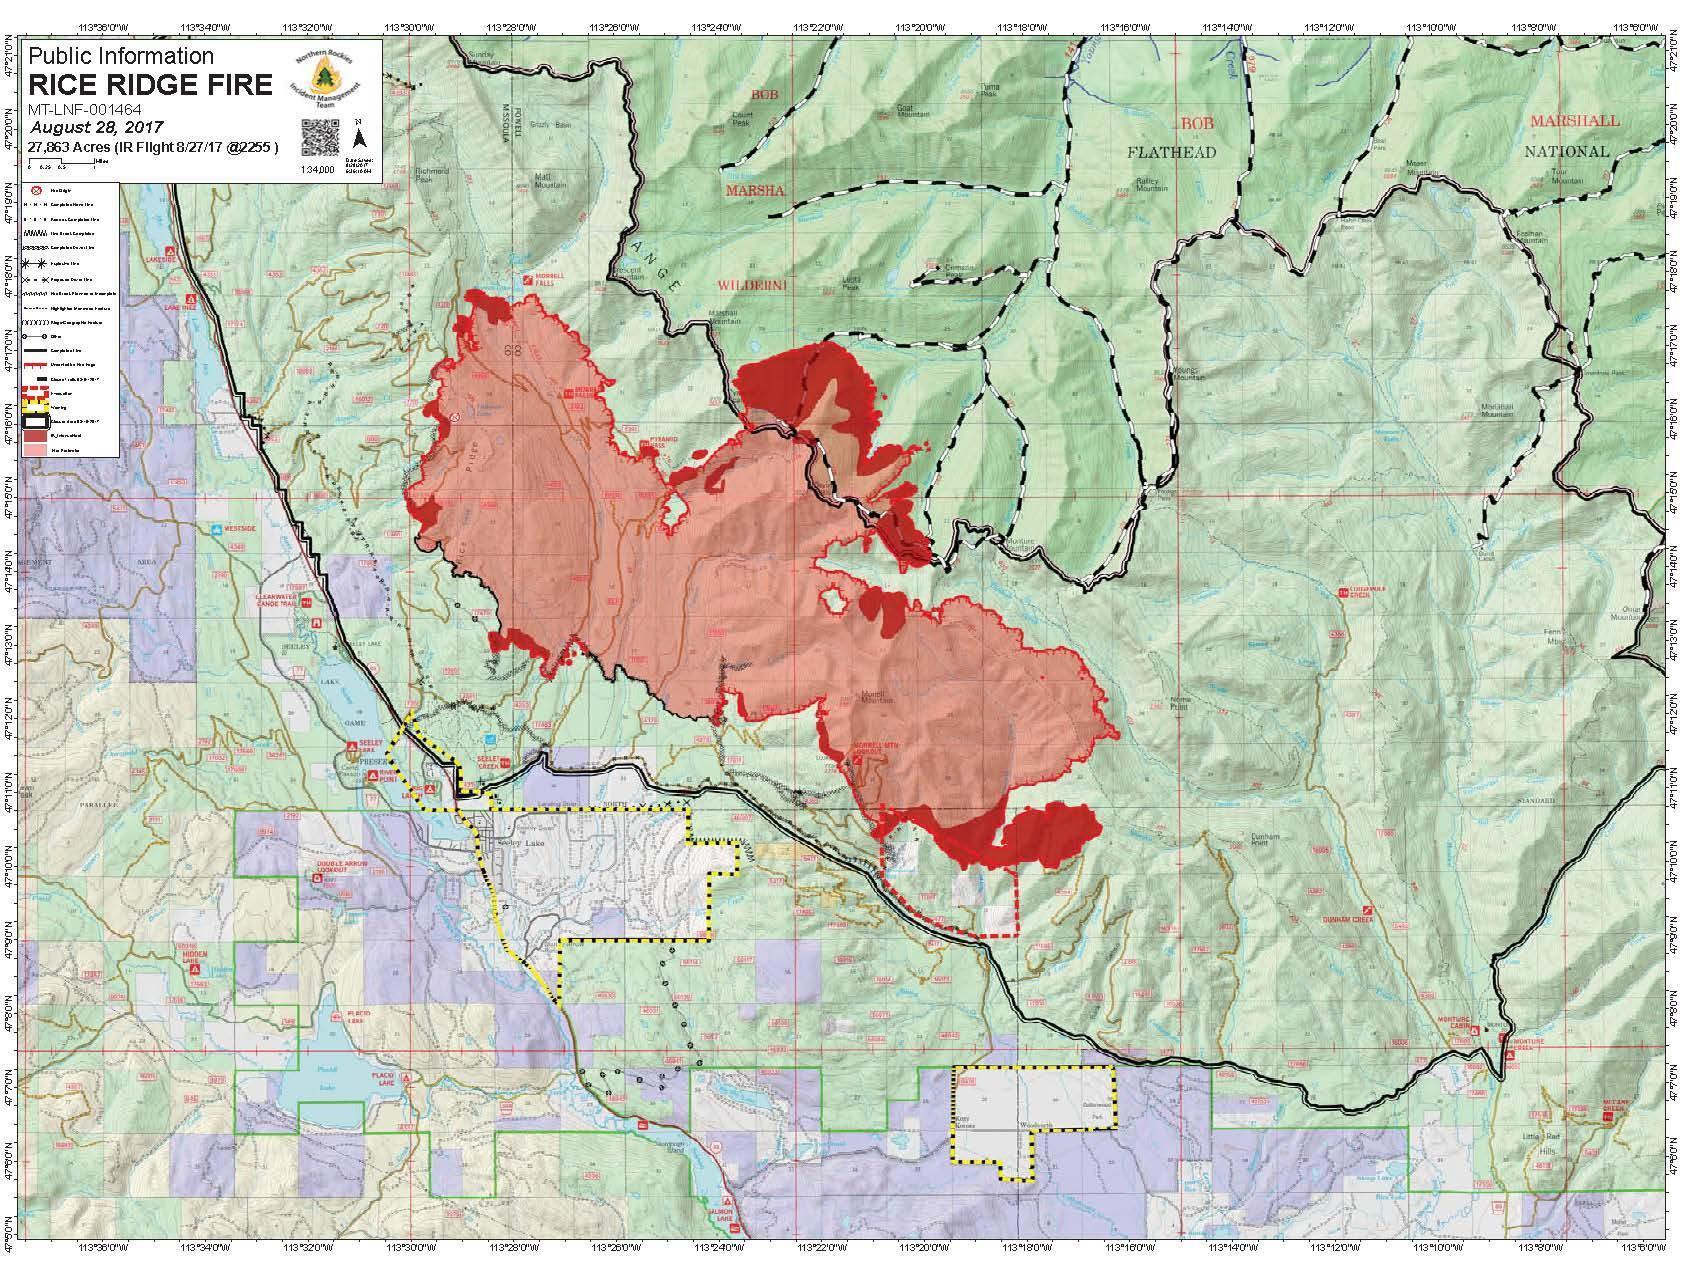 New Evacuation Order For 580 Homes In Seeley Lake MTPR